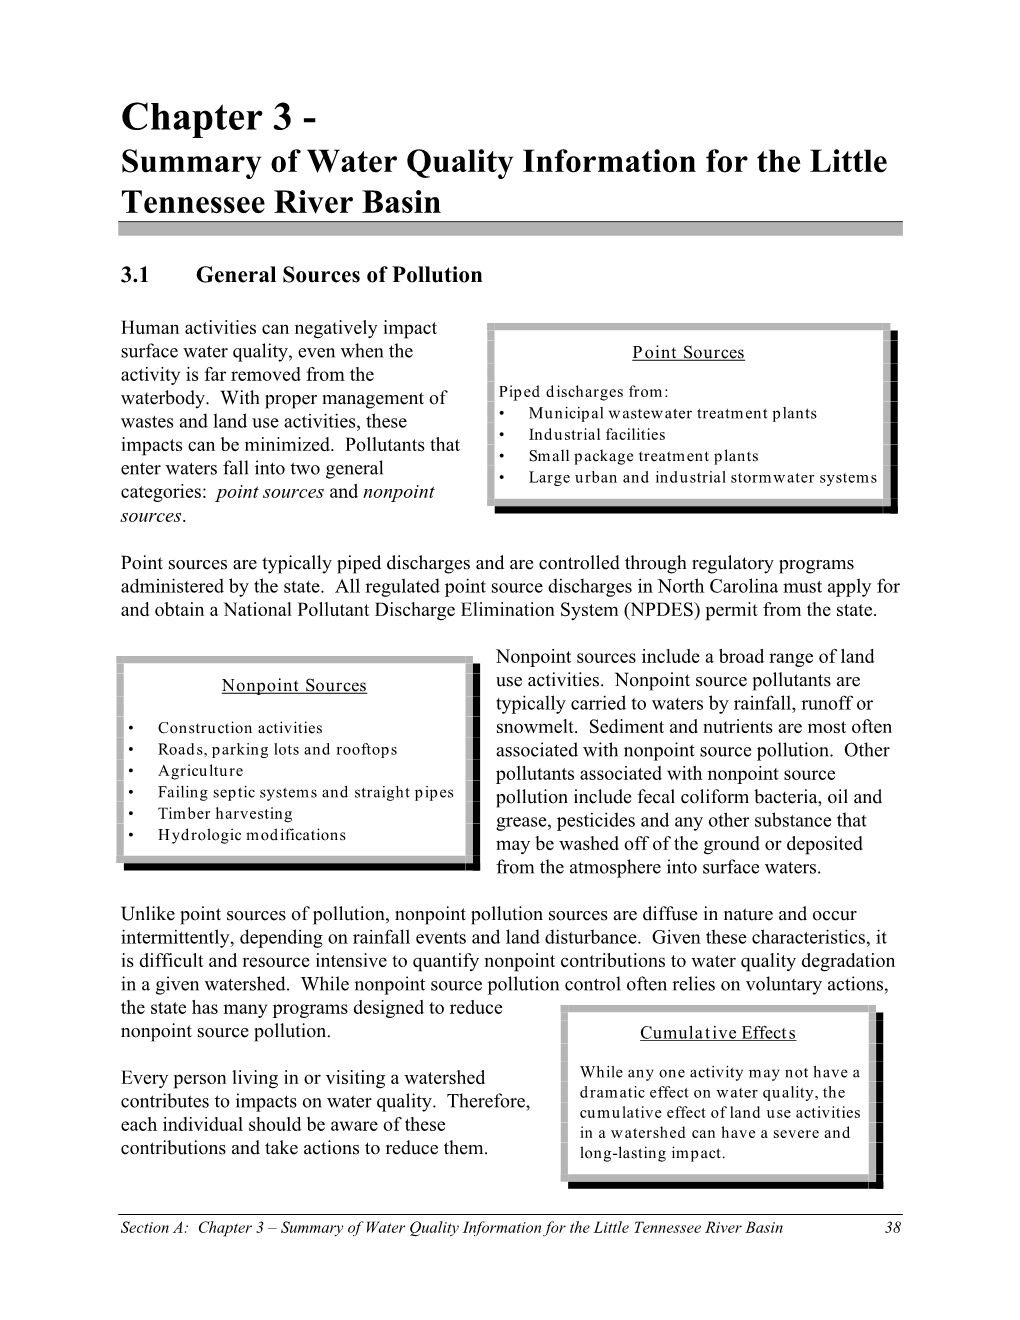 Summary of Water Quality Information for the Little Tennessee River Basin